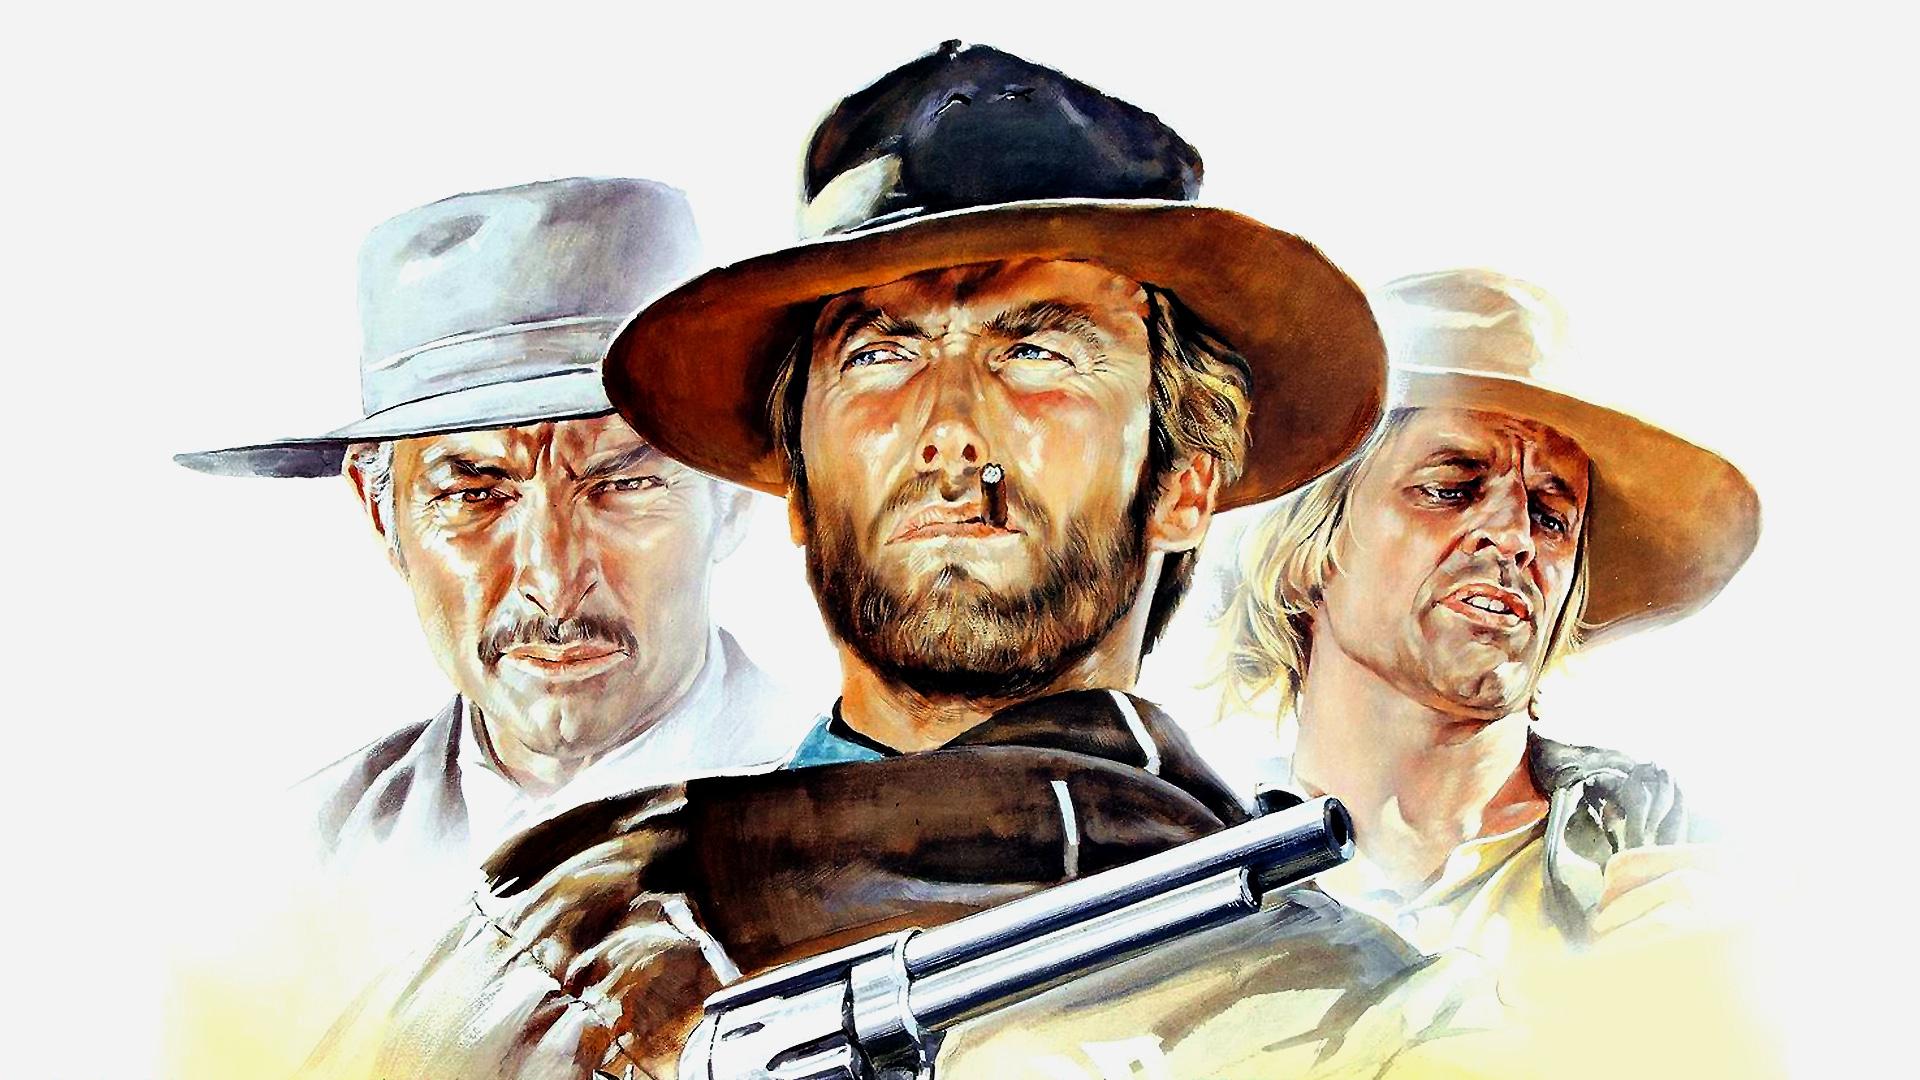 For A Few Dollars More HD Wallpaper